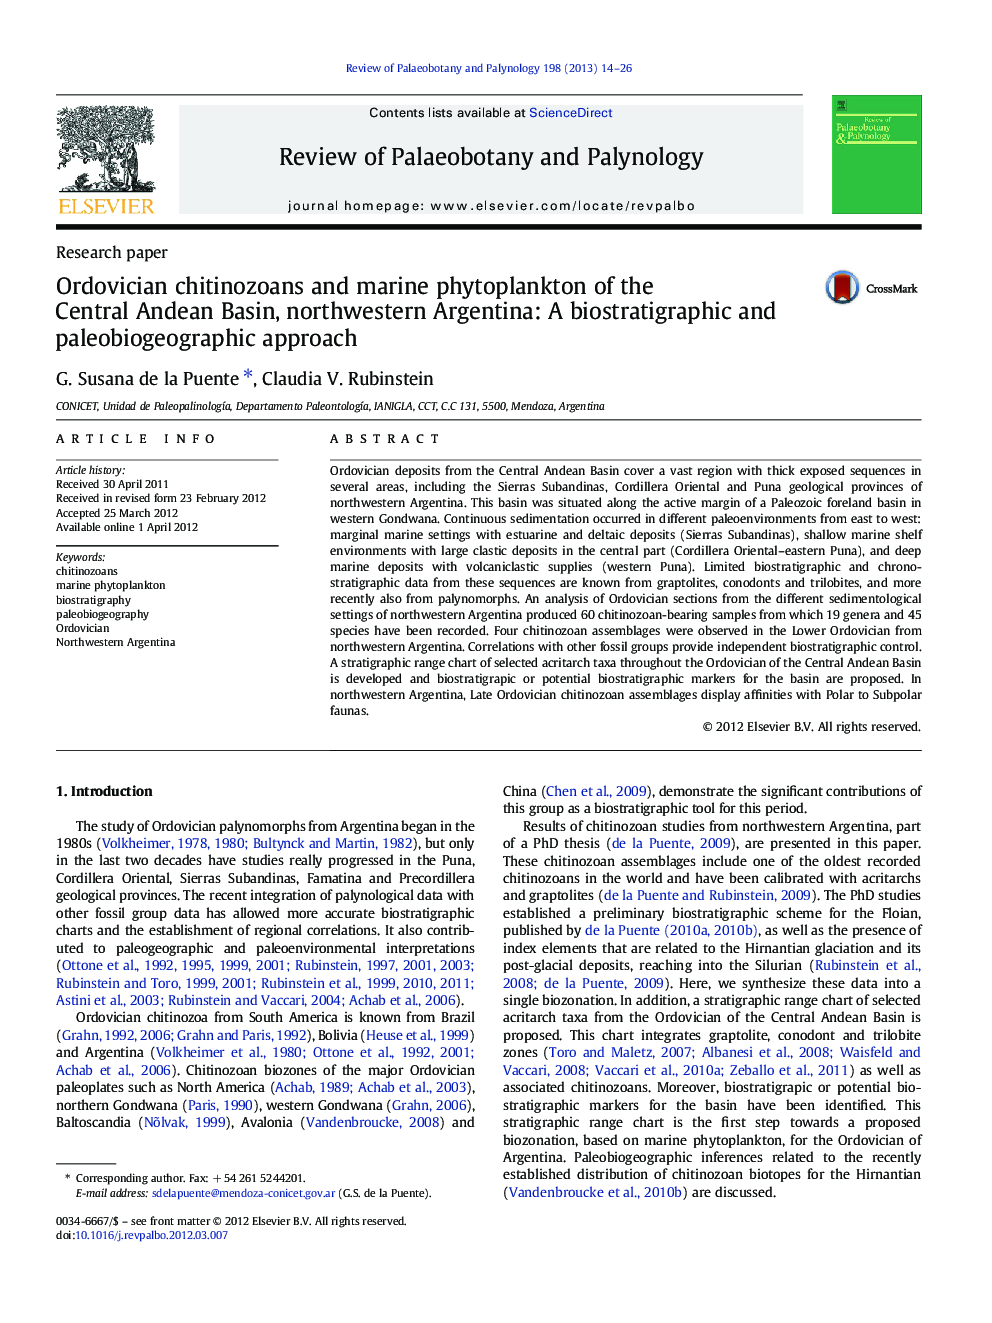 Ordovician chitinozoans and marine phytoplankton of the Central Andean Basin, northwestern Argentina: A biostratigraphic and paleobiogeographic approach